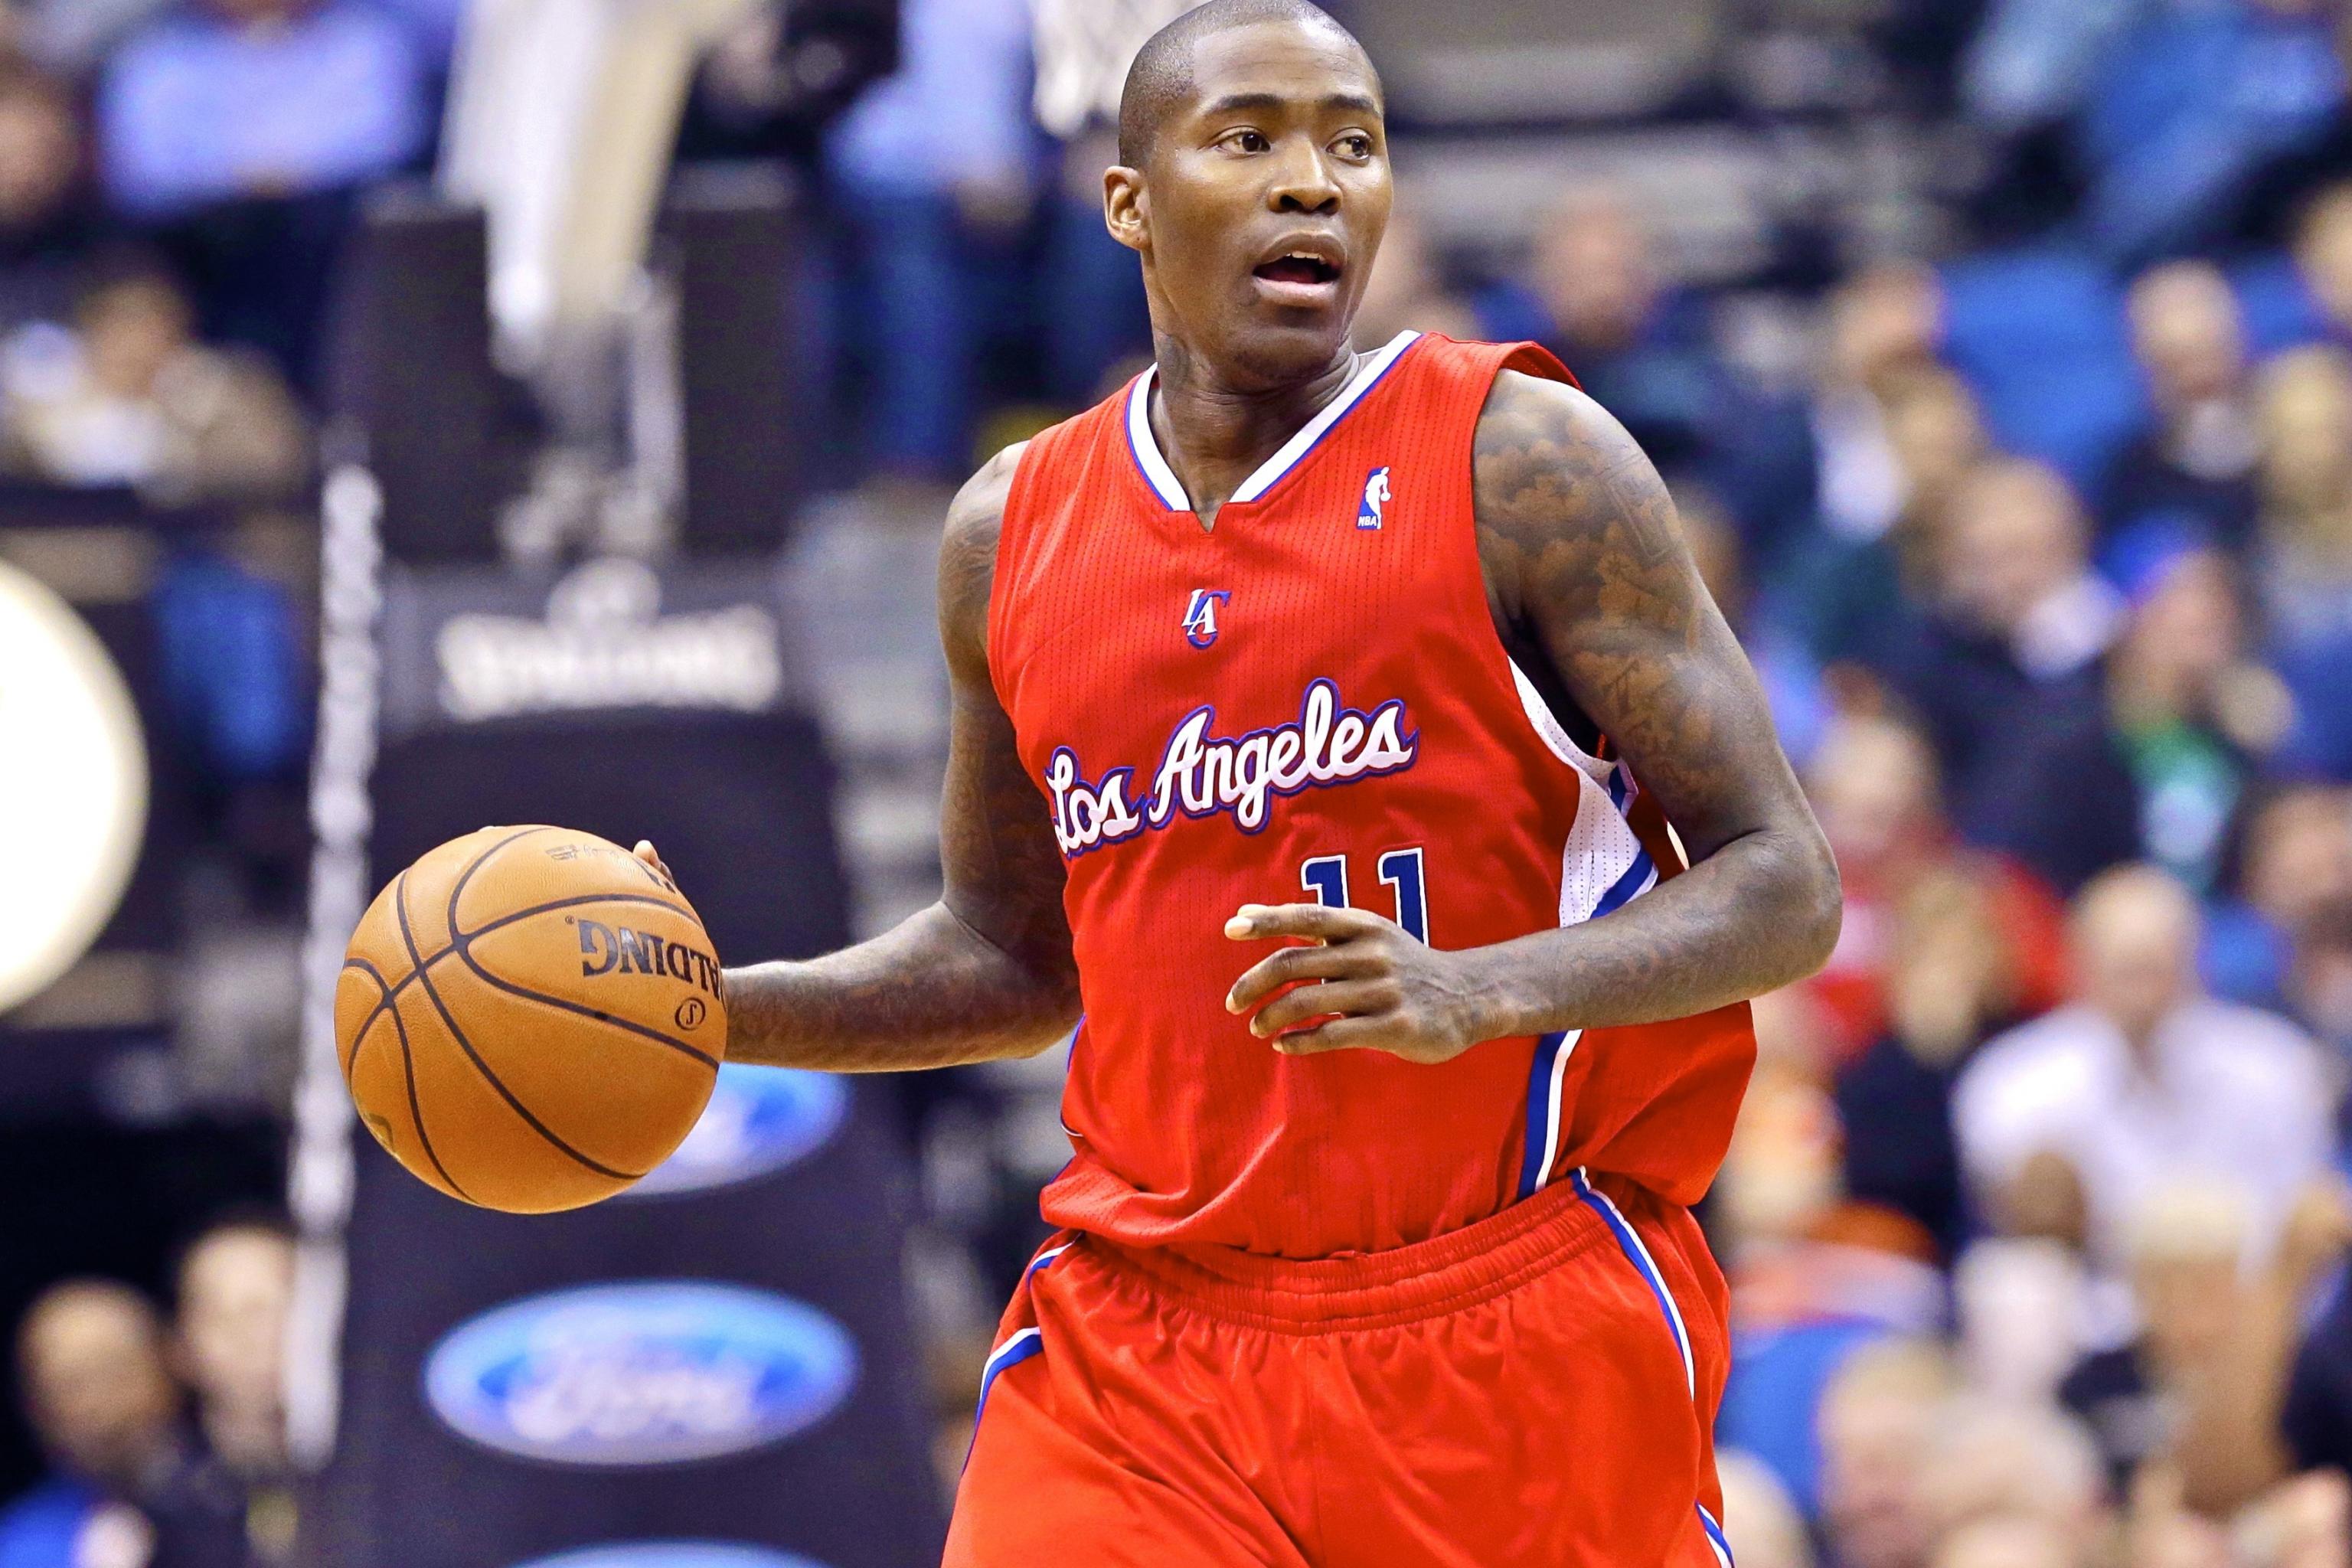 NBA Veteran Jamal Crawford: Improve at Your Own Pace With Shoot 360